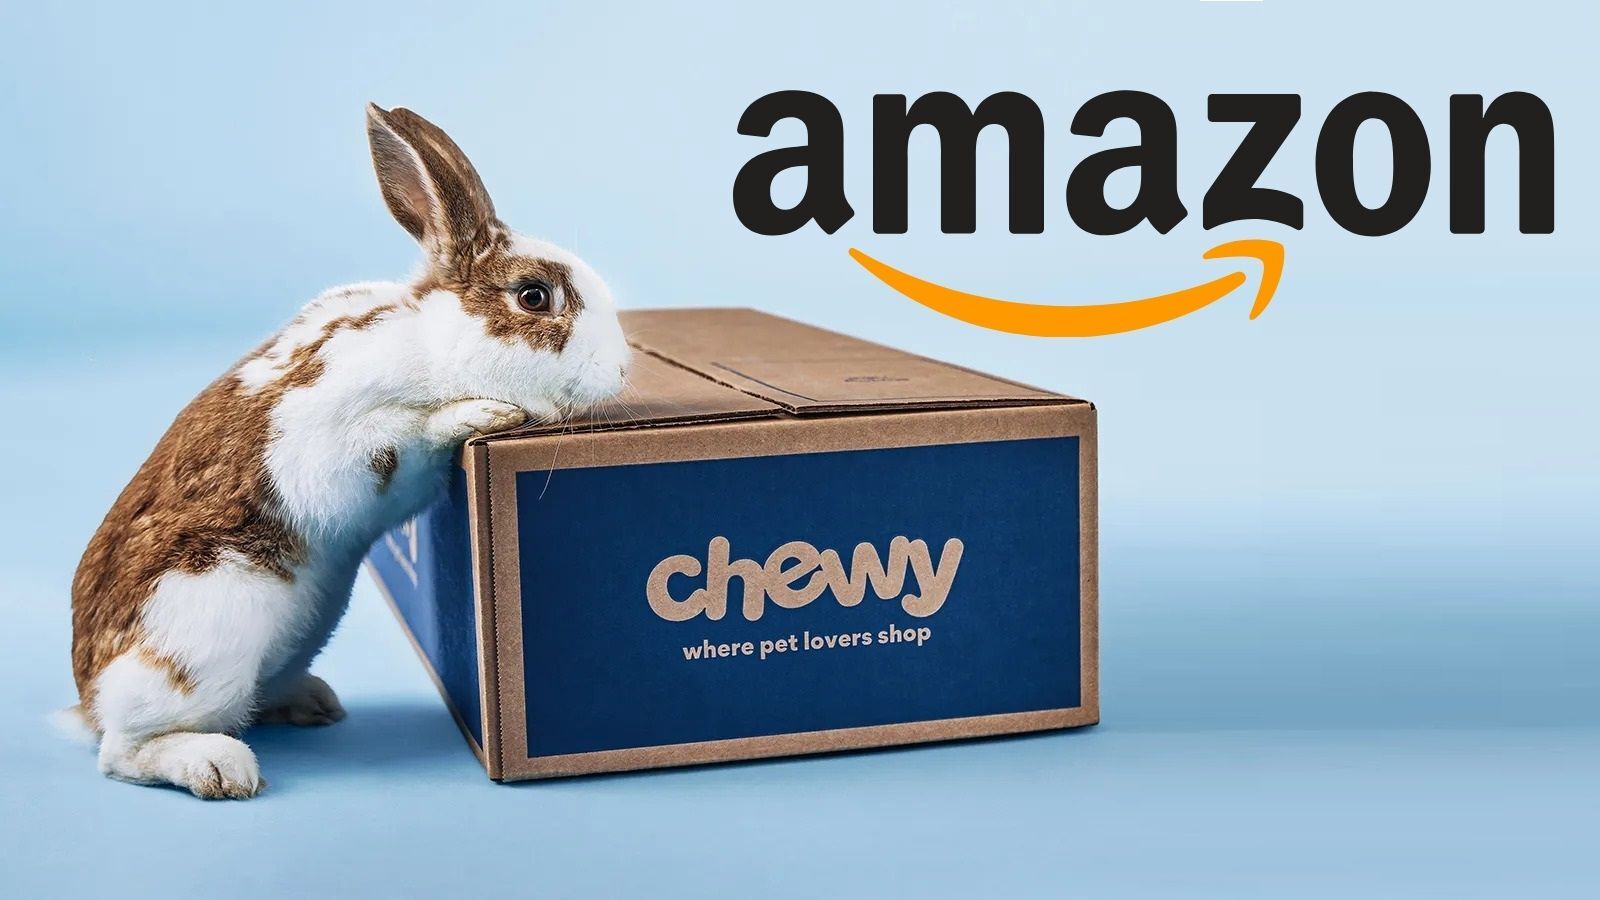 Does Amazon Own Chewy in 2022?